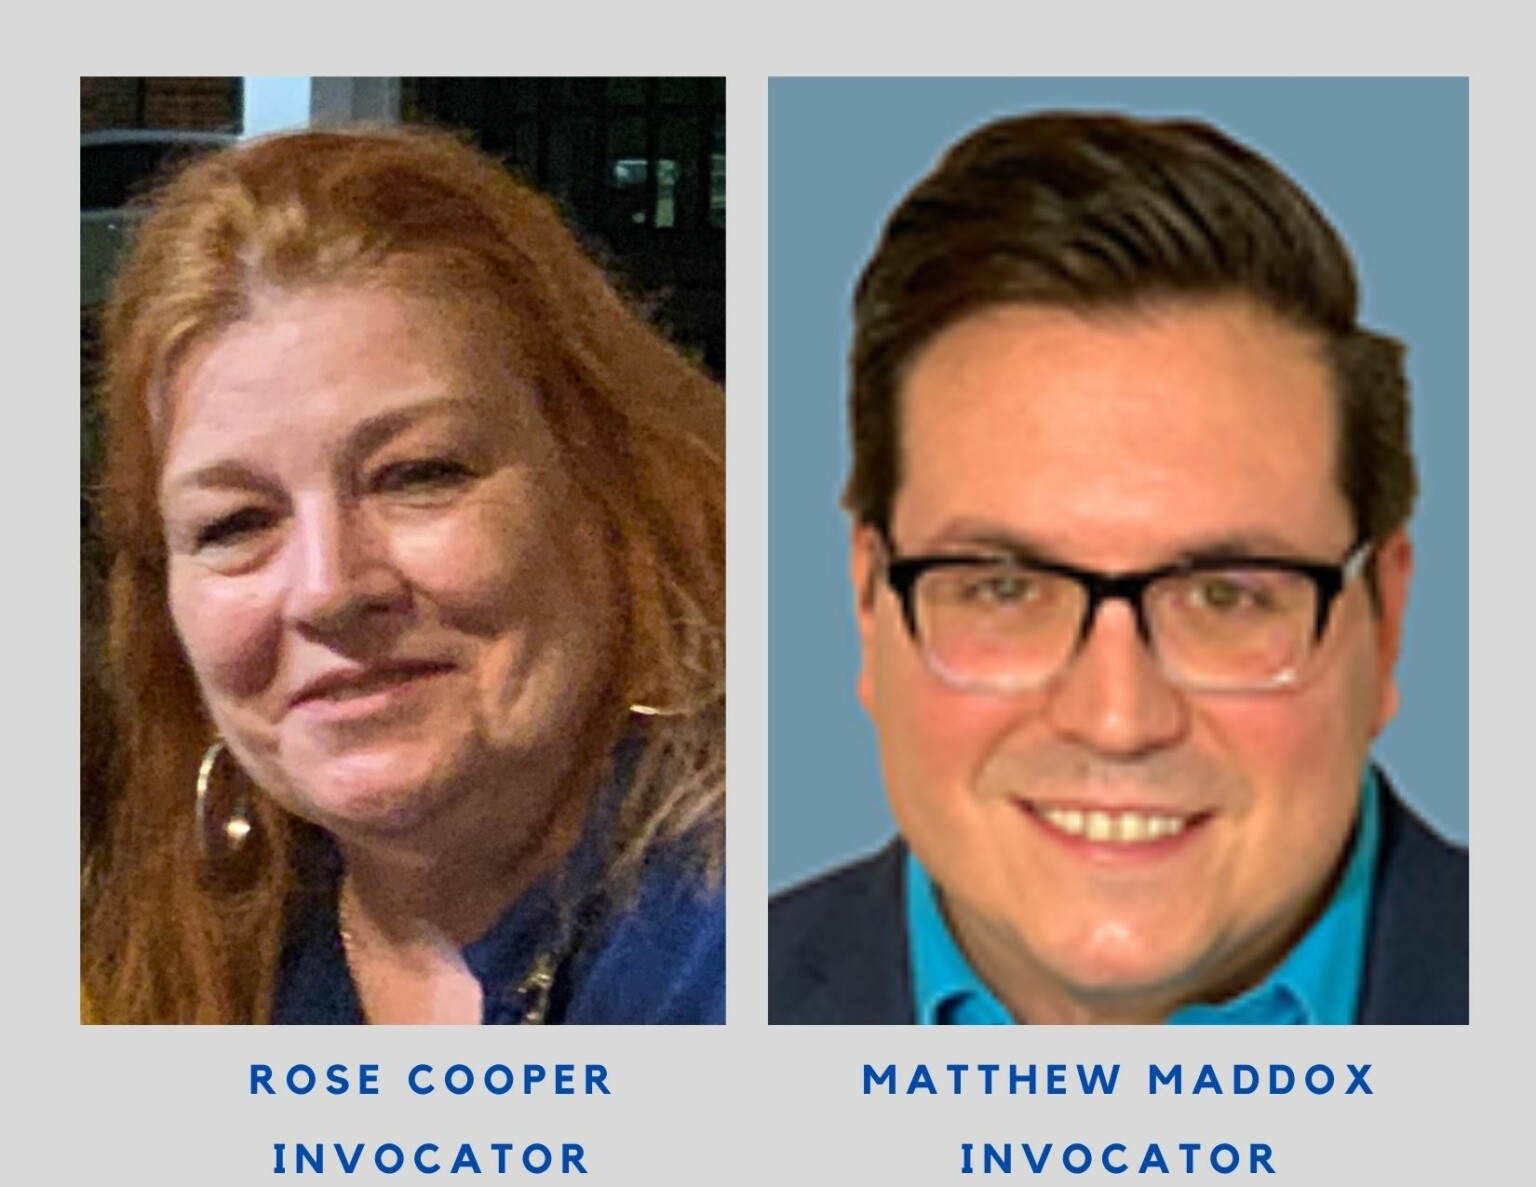 Rose Cooper, Introducer & Matthew Maddox, Invocator on July 22, 2021 at Stl Louis Rotary Lunch